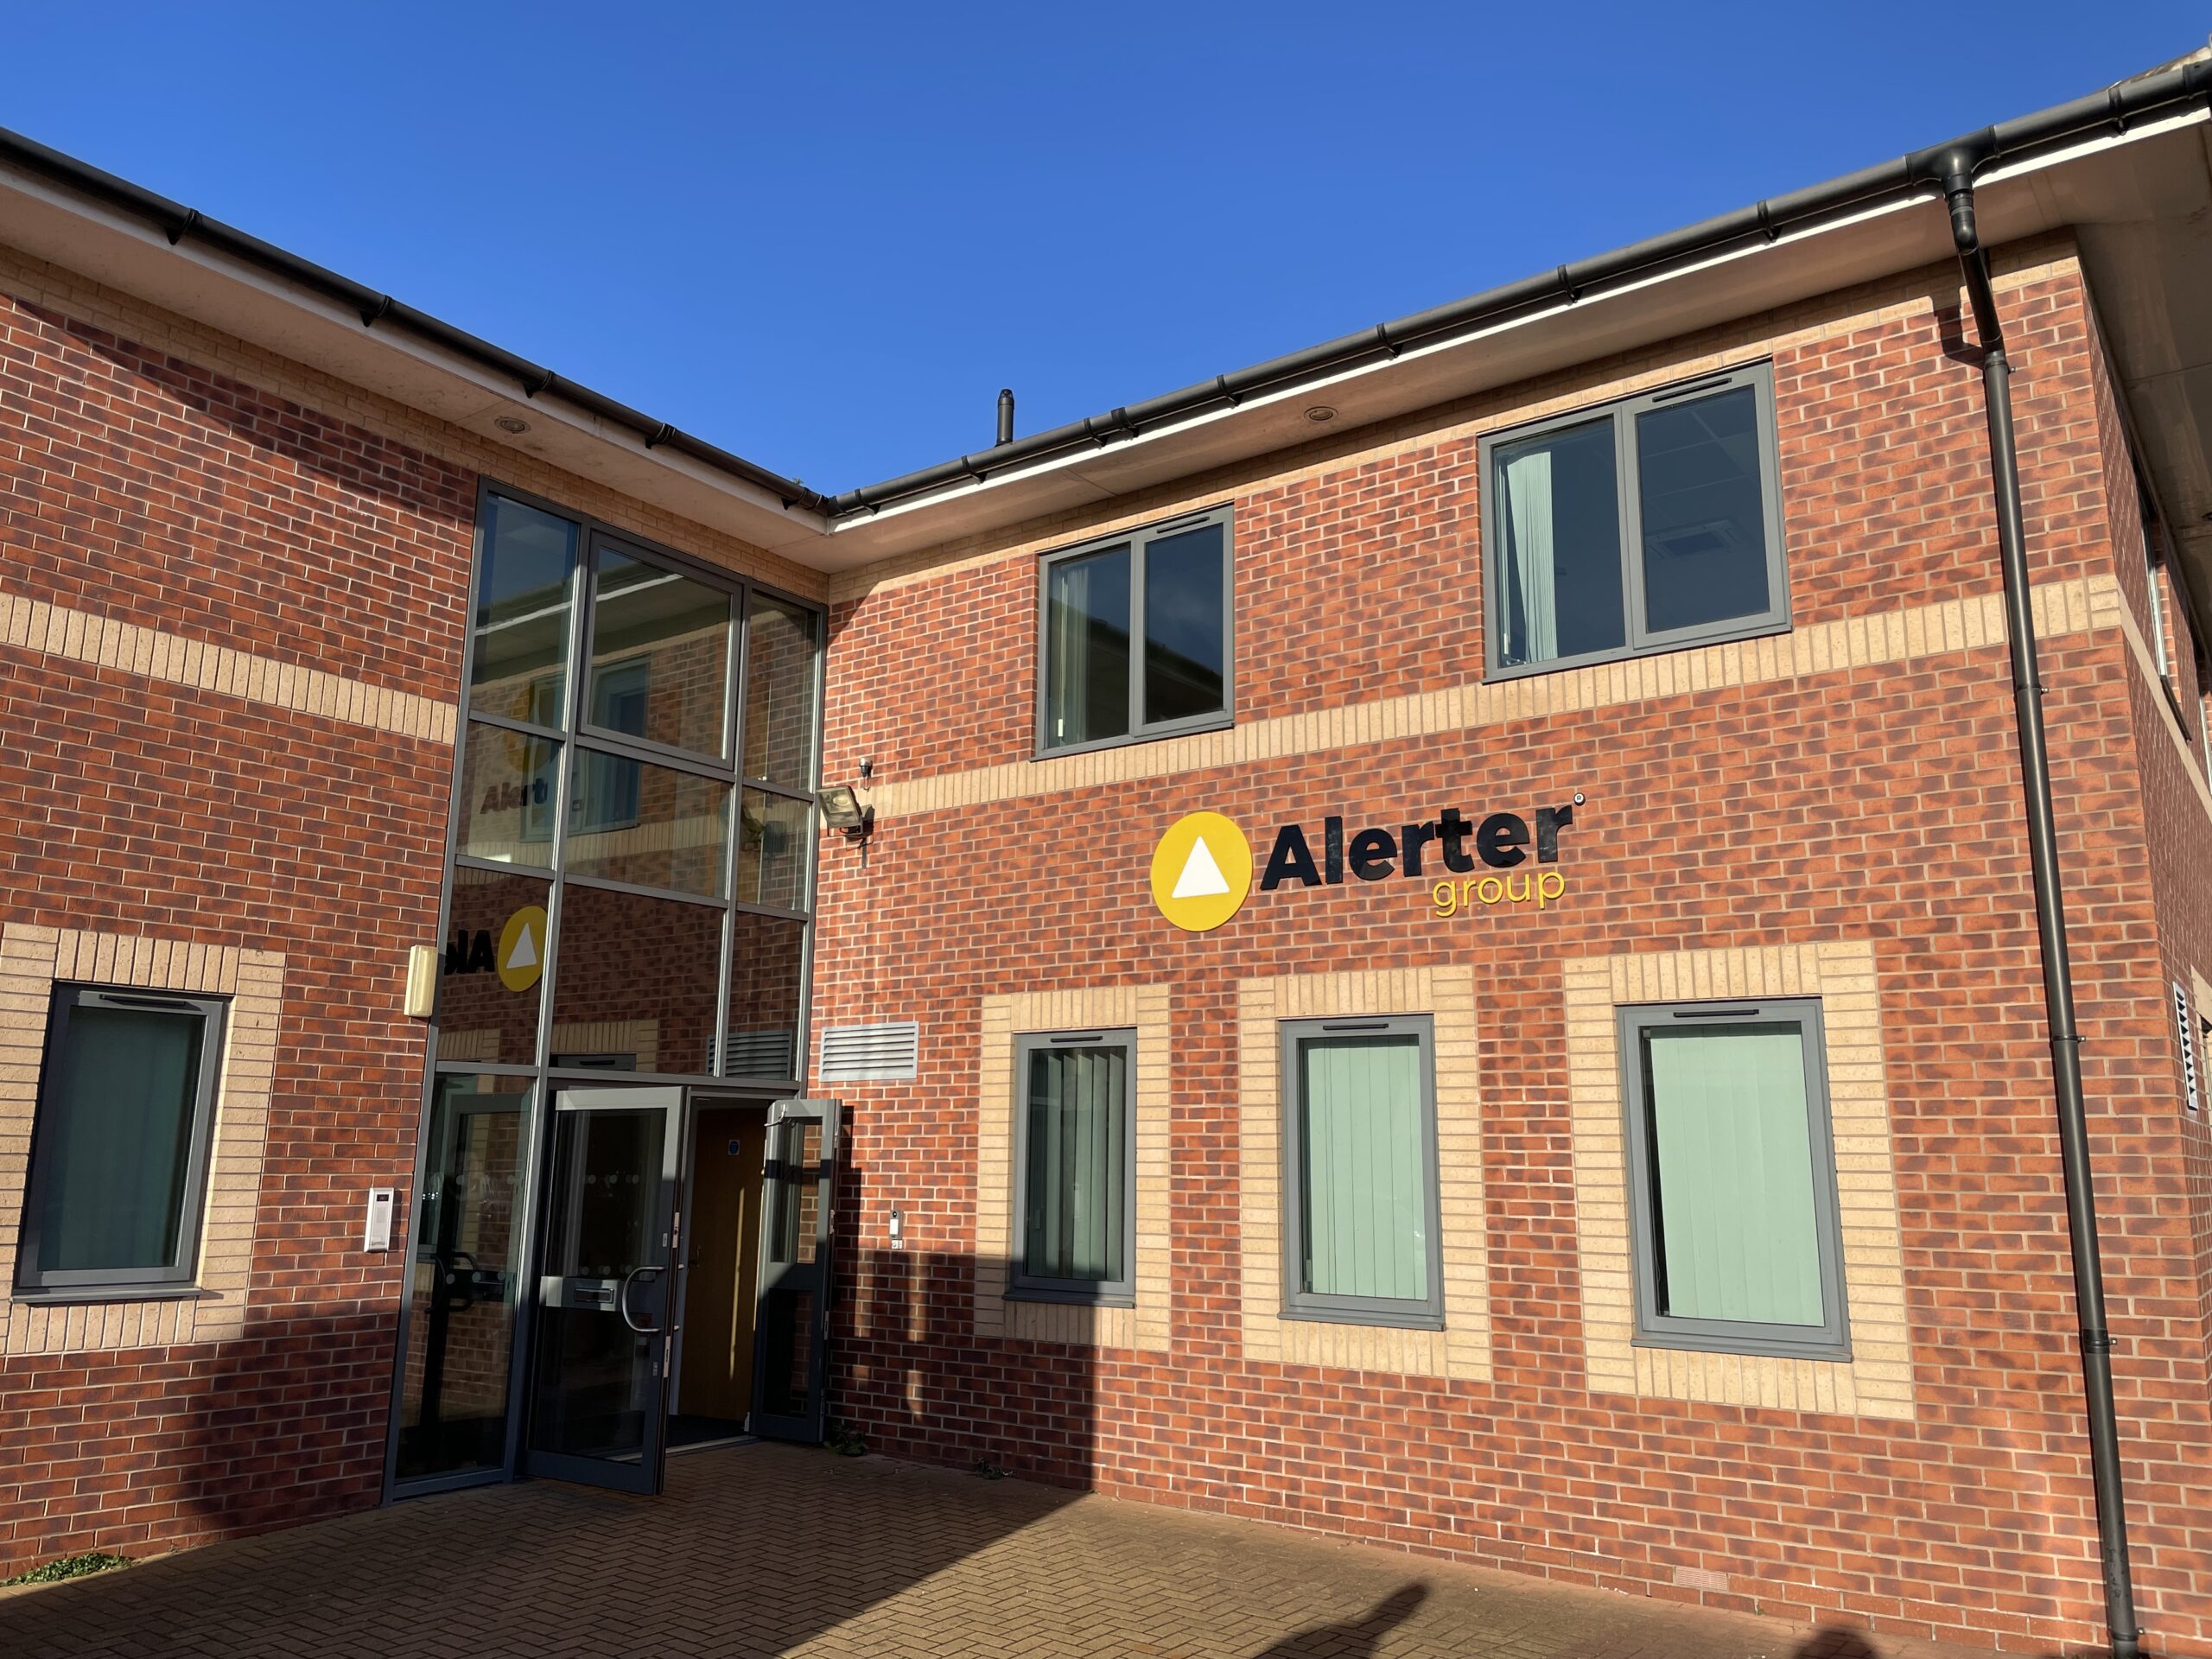 A photo of the outside of Alerter Group's head office. The building is constructed from red brick, and the company logo is on the front of the building. The front doors are open and it's a sunny day with clear blue skies.